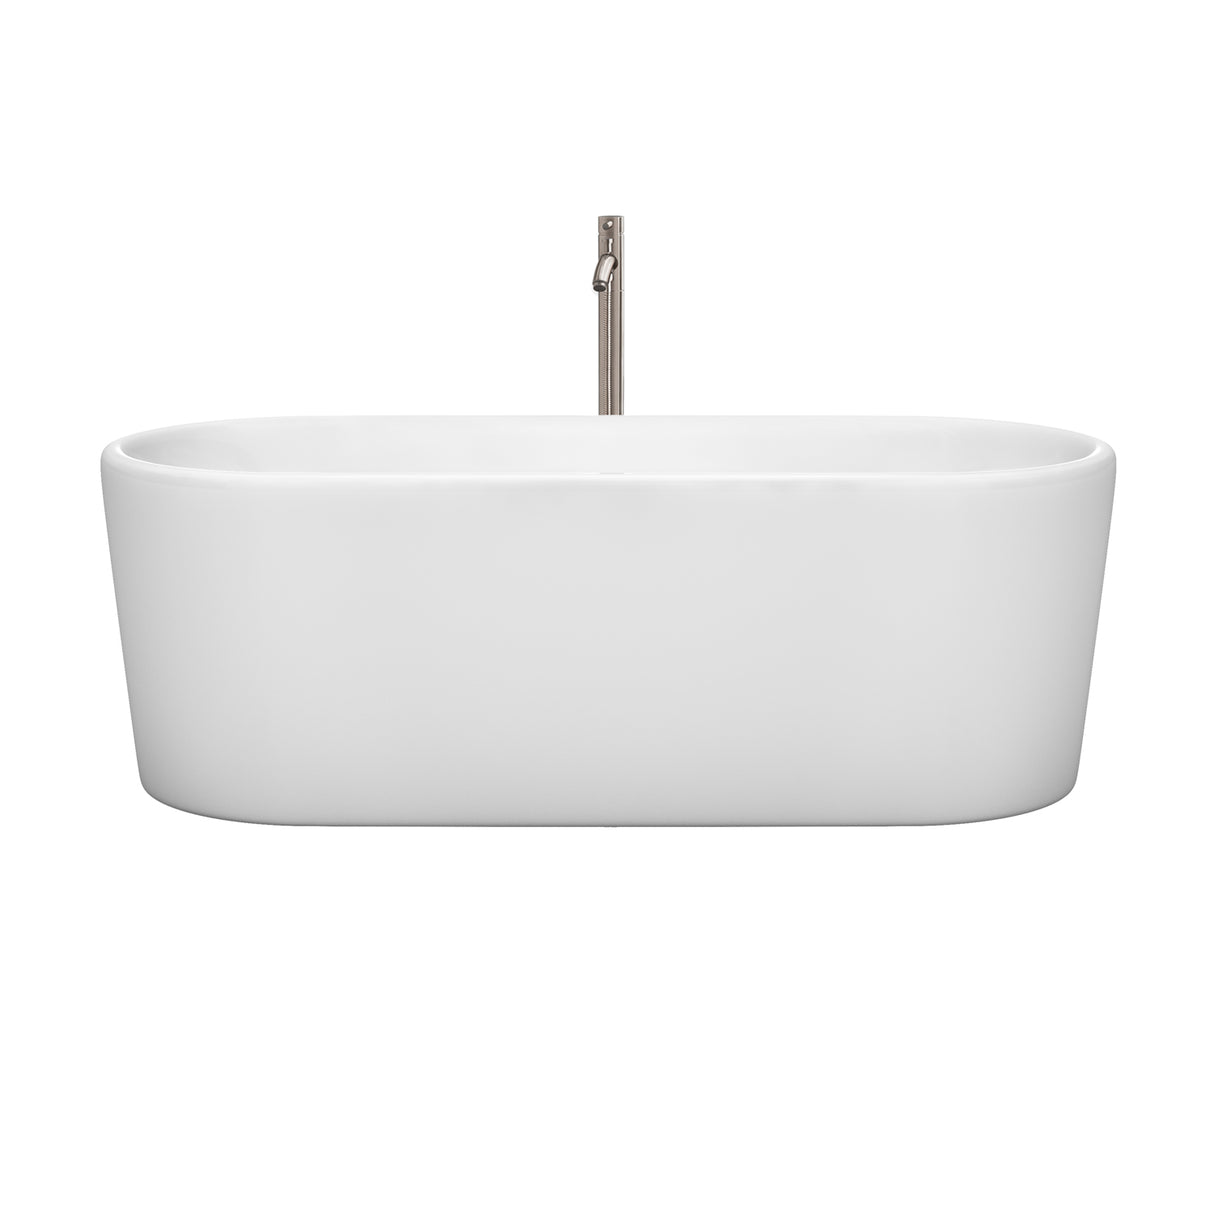 Ursula 67 Inch Freestanding Bathtub in White with Floor Mounted Faucet Drain and Overflow Trim in Brushed Nickel